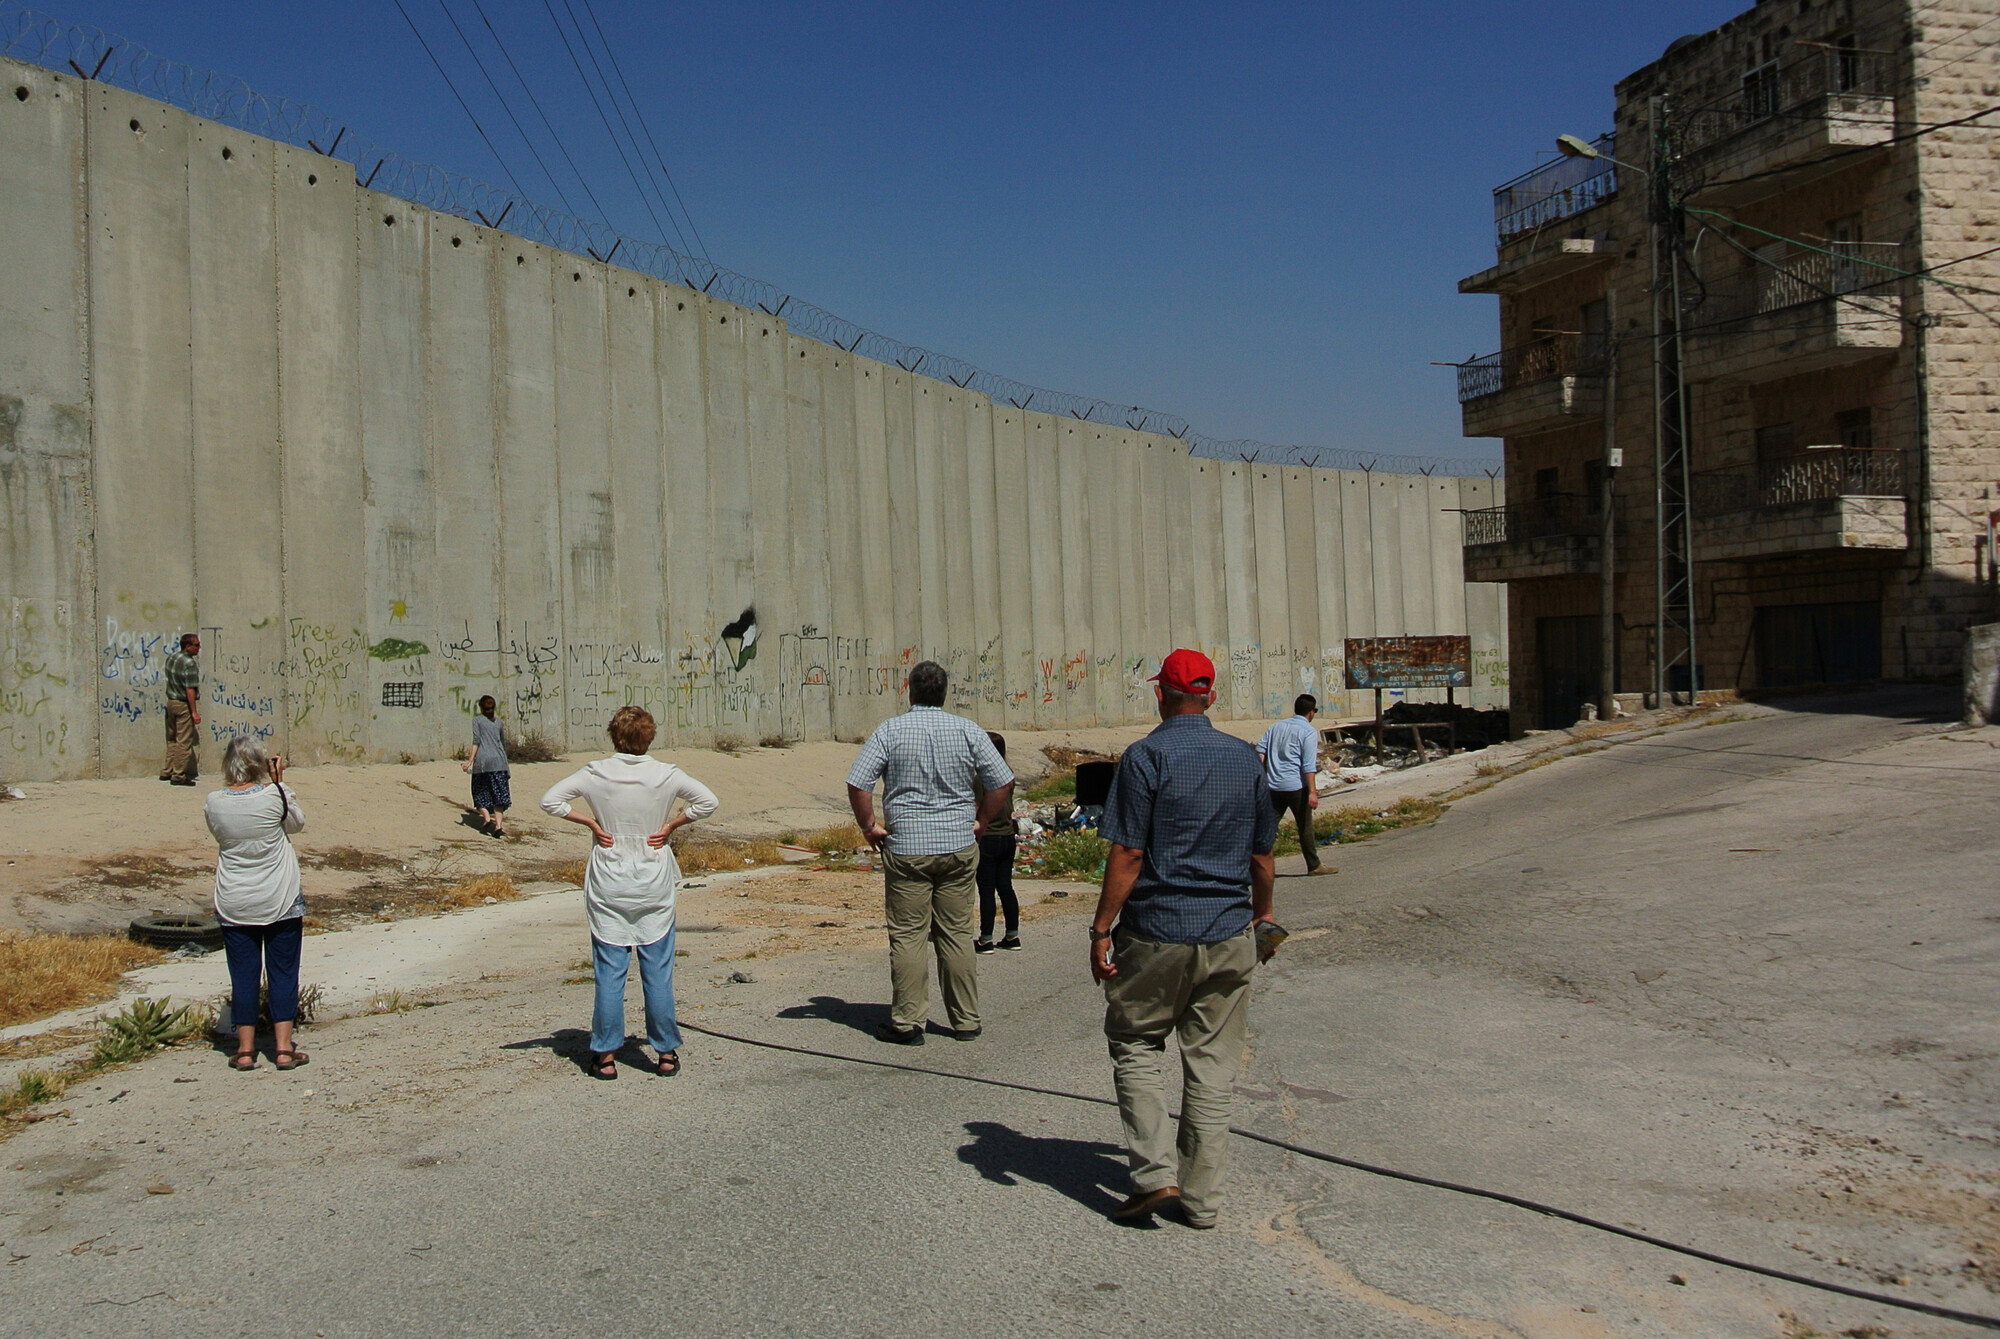 A group of people near the Palestine-Israel border wall